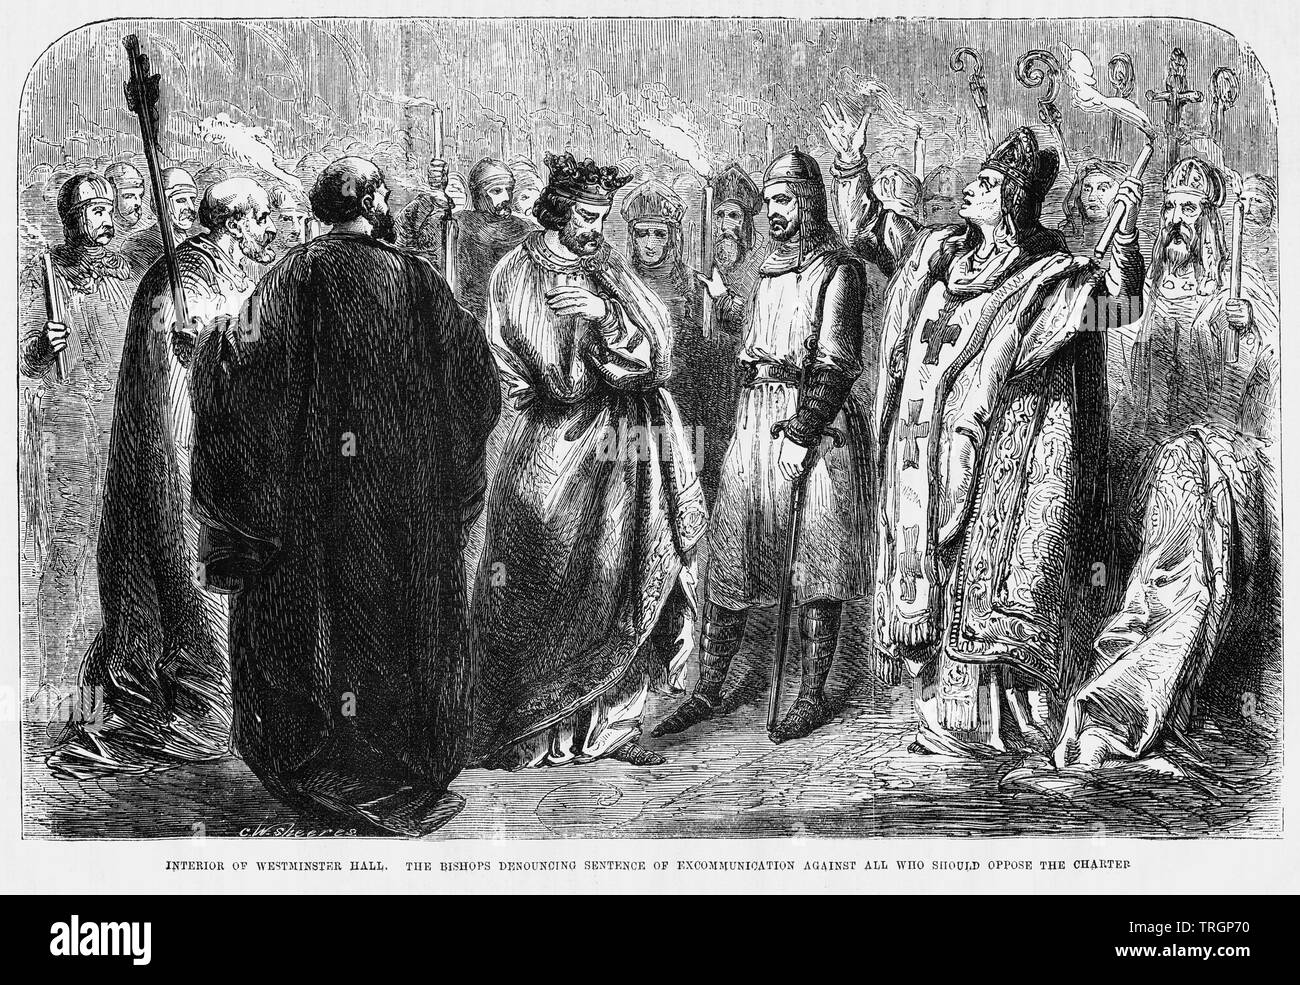 Interior of Westminster Hall, The Bishops Denouncing Sentence of Excommunication again all who should oppose the Charter, Illustration from John Cassell's Illustrated History of England, Vol. I from the earliest period to the reign of Edward the Fourth, Cassell, Petter and Galpin, 1857 Stock Photo